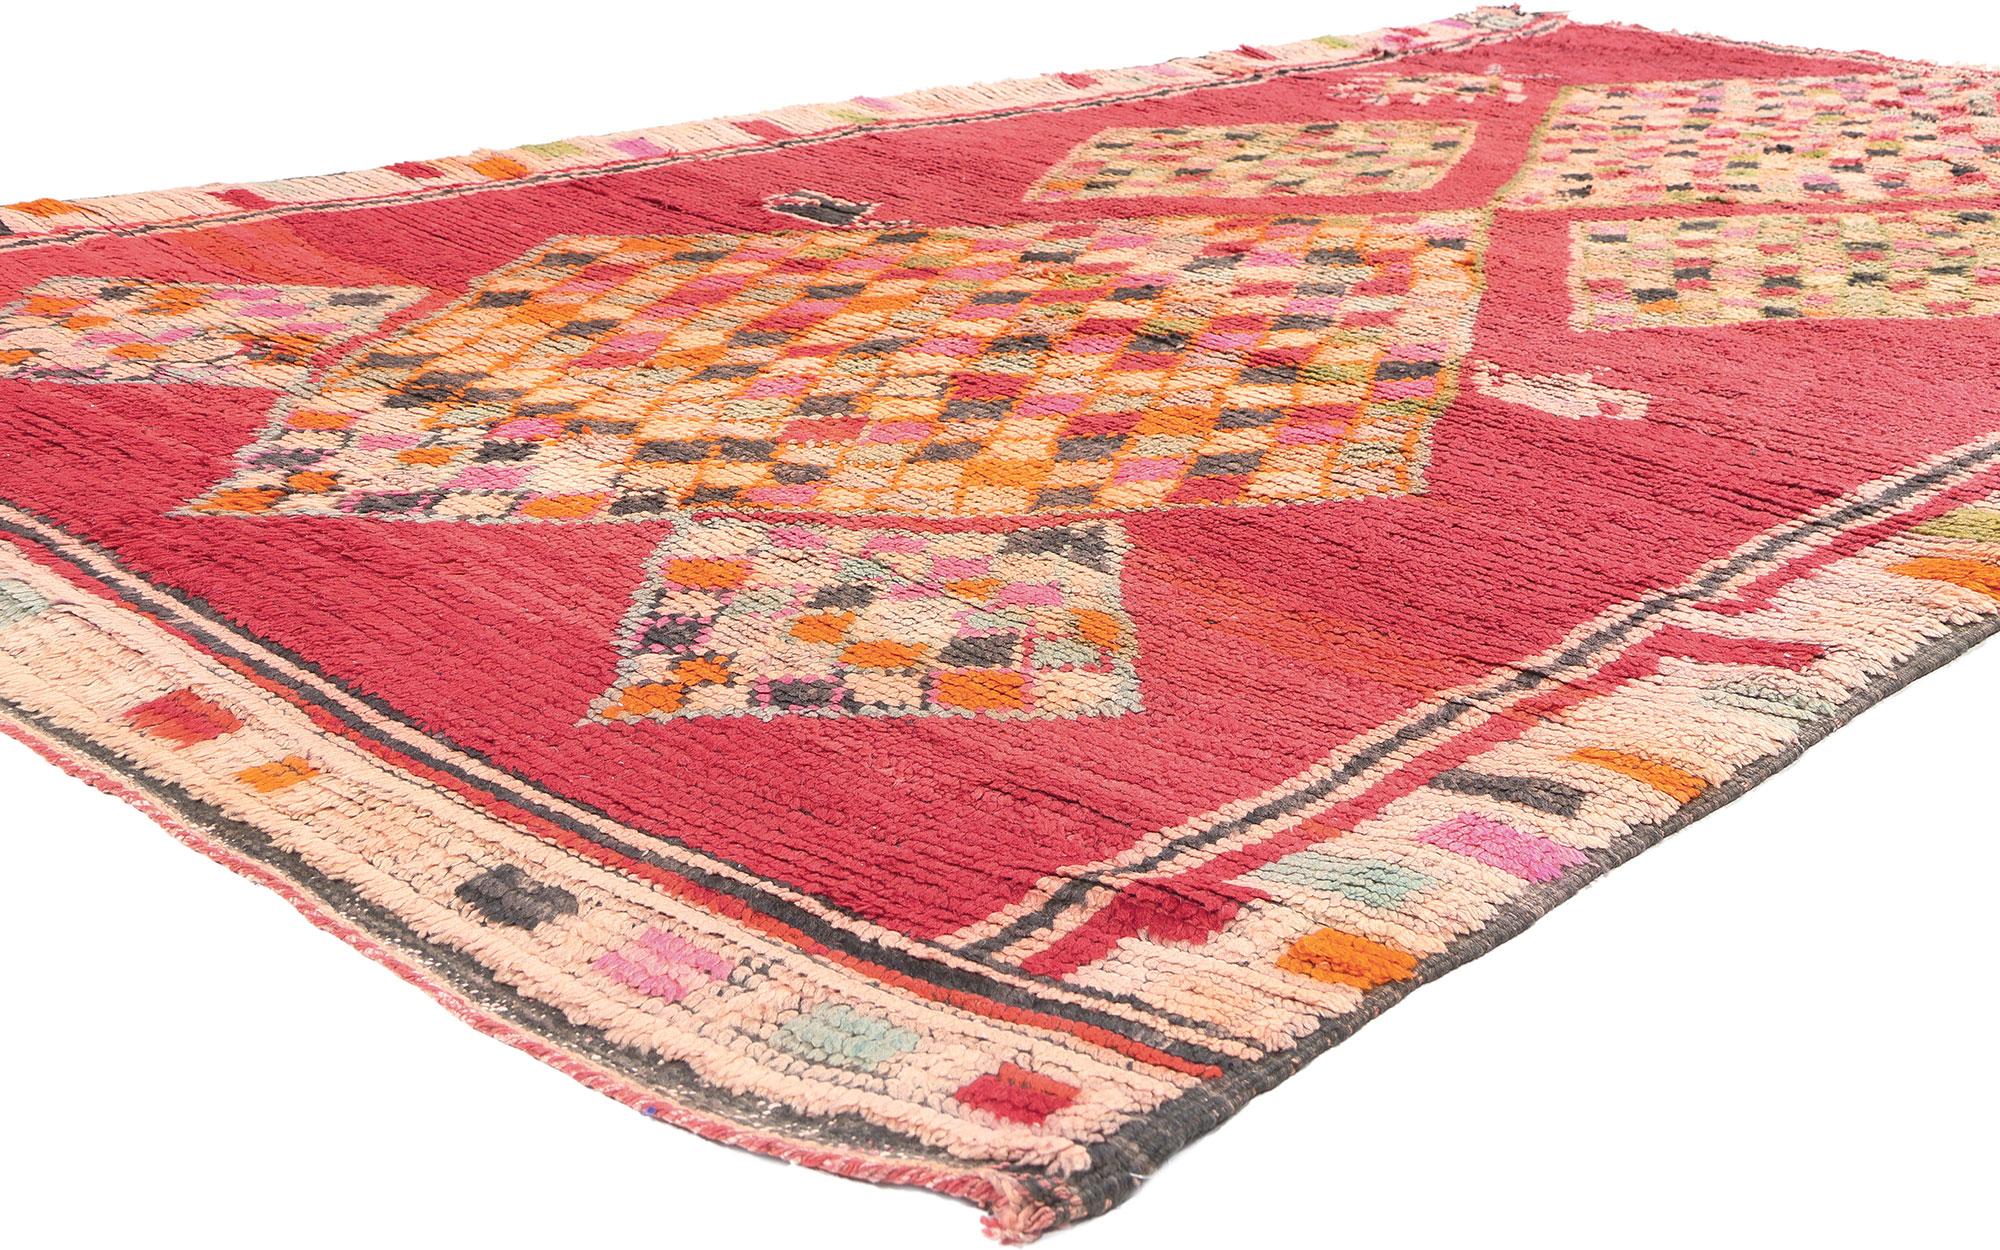 20898 Vintage Red Boujad Moroccan Rug, 06'02 x 10'03.

Behold the Boujad rug—a handwoven showstopper straight from the catwalks of Boujad in the Khouribga region of Morocco. Known for its eccentricity and artistic flair, this rug is like the Lady